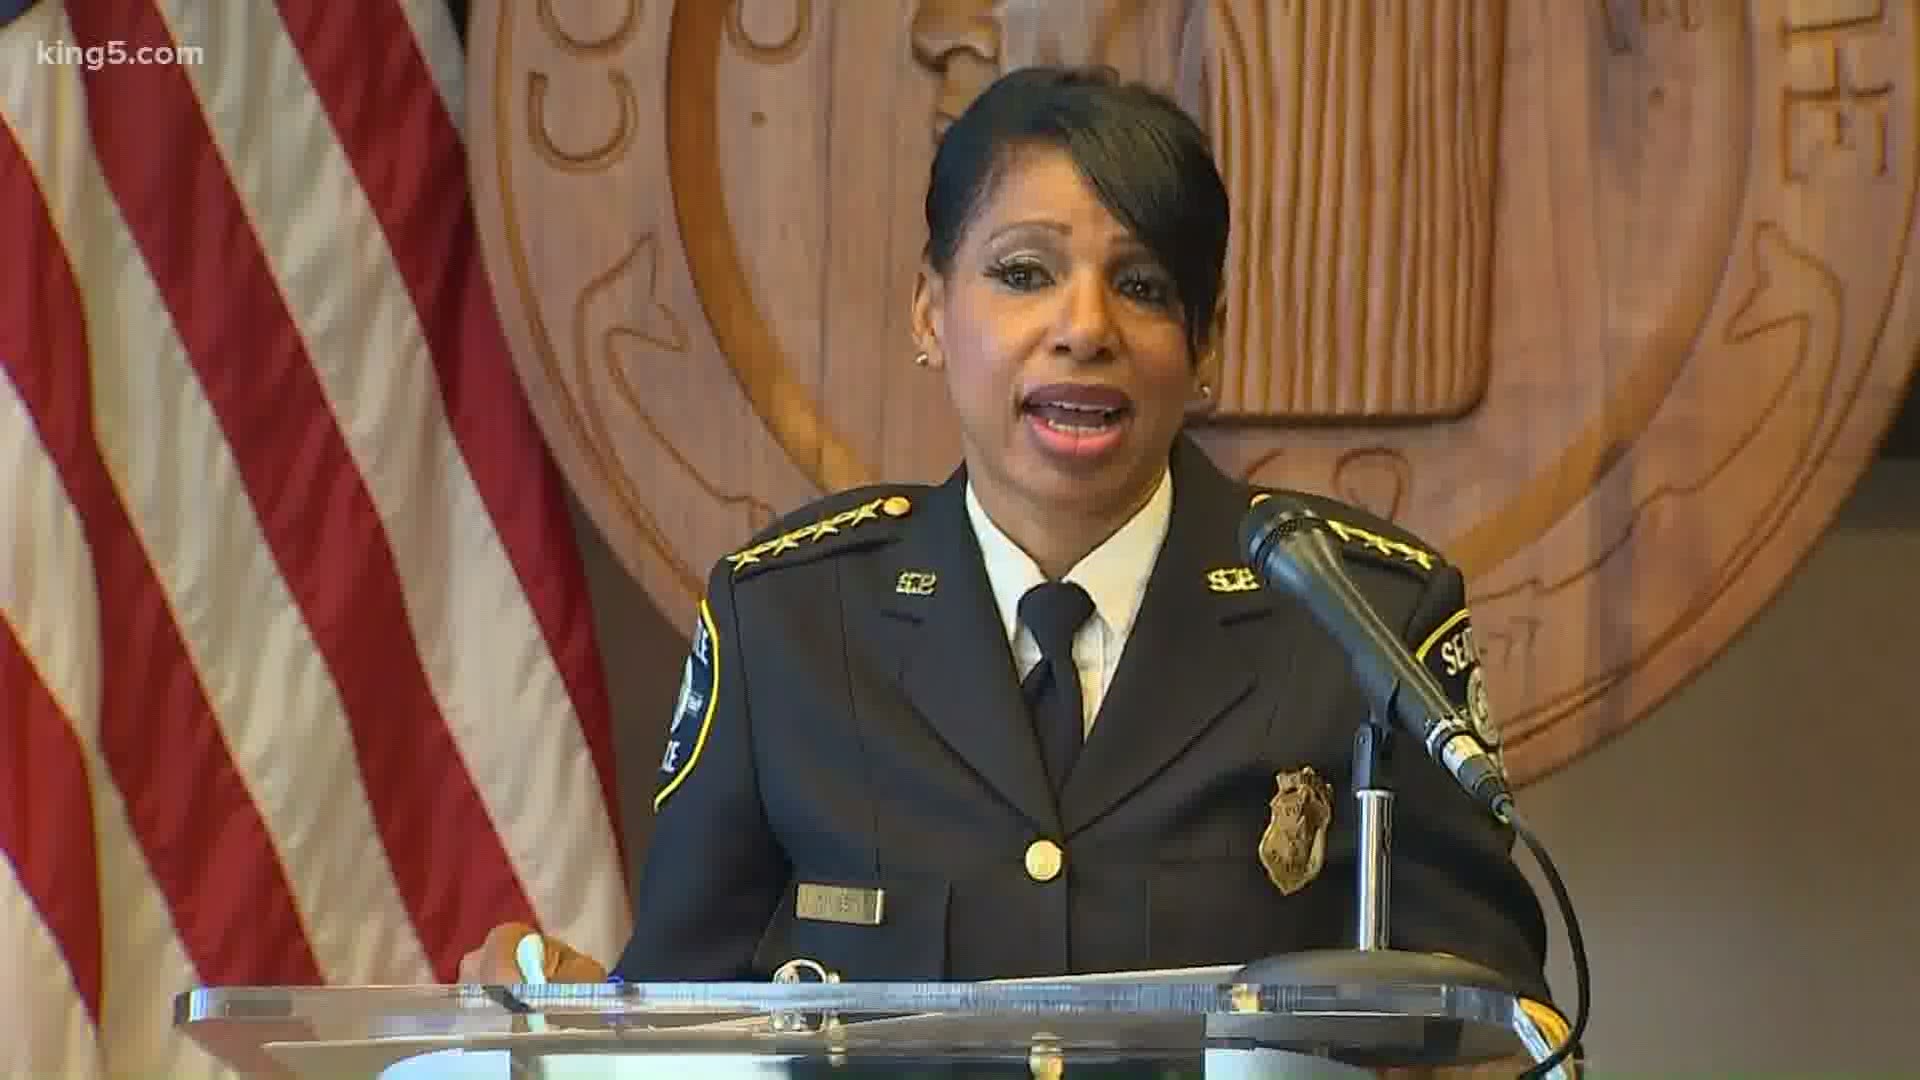 Best's resignation comes after the Seattle City Council voted to cut spending for the Seattle Police Department on Monday.